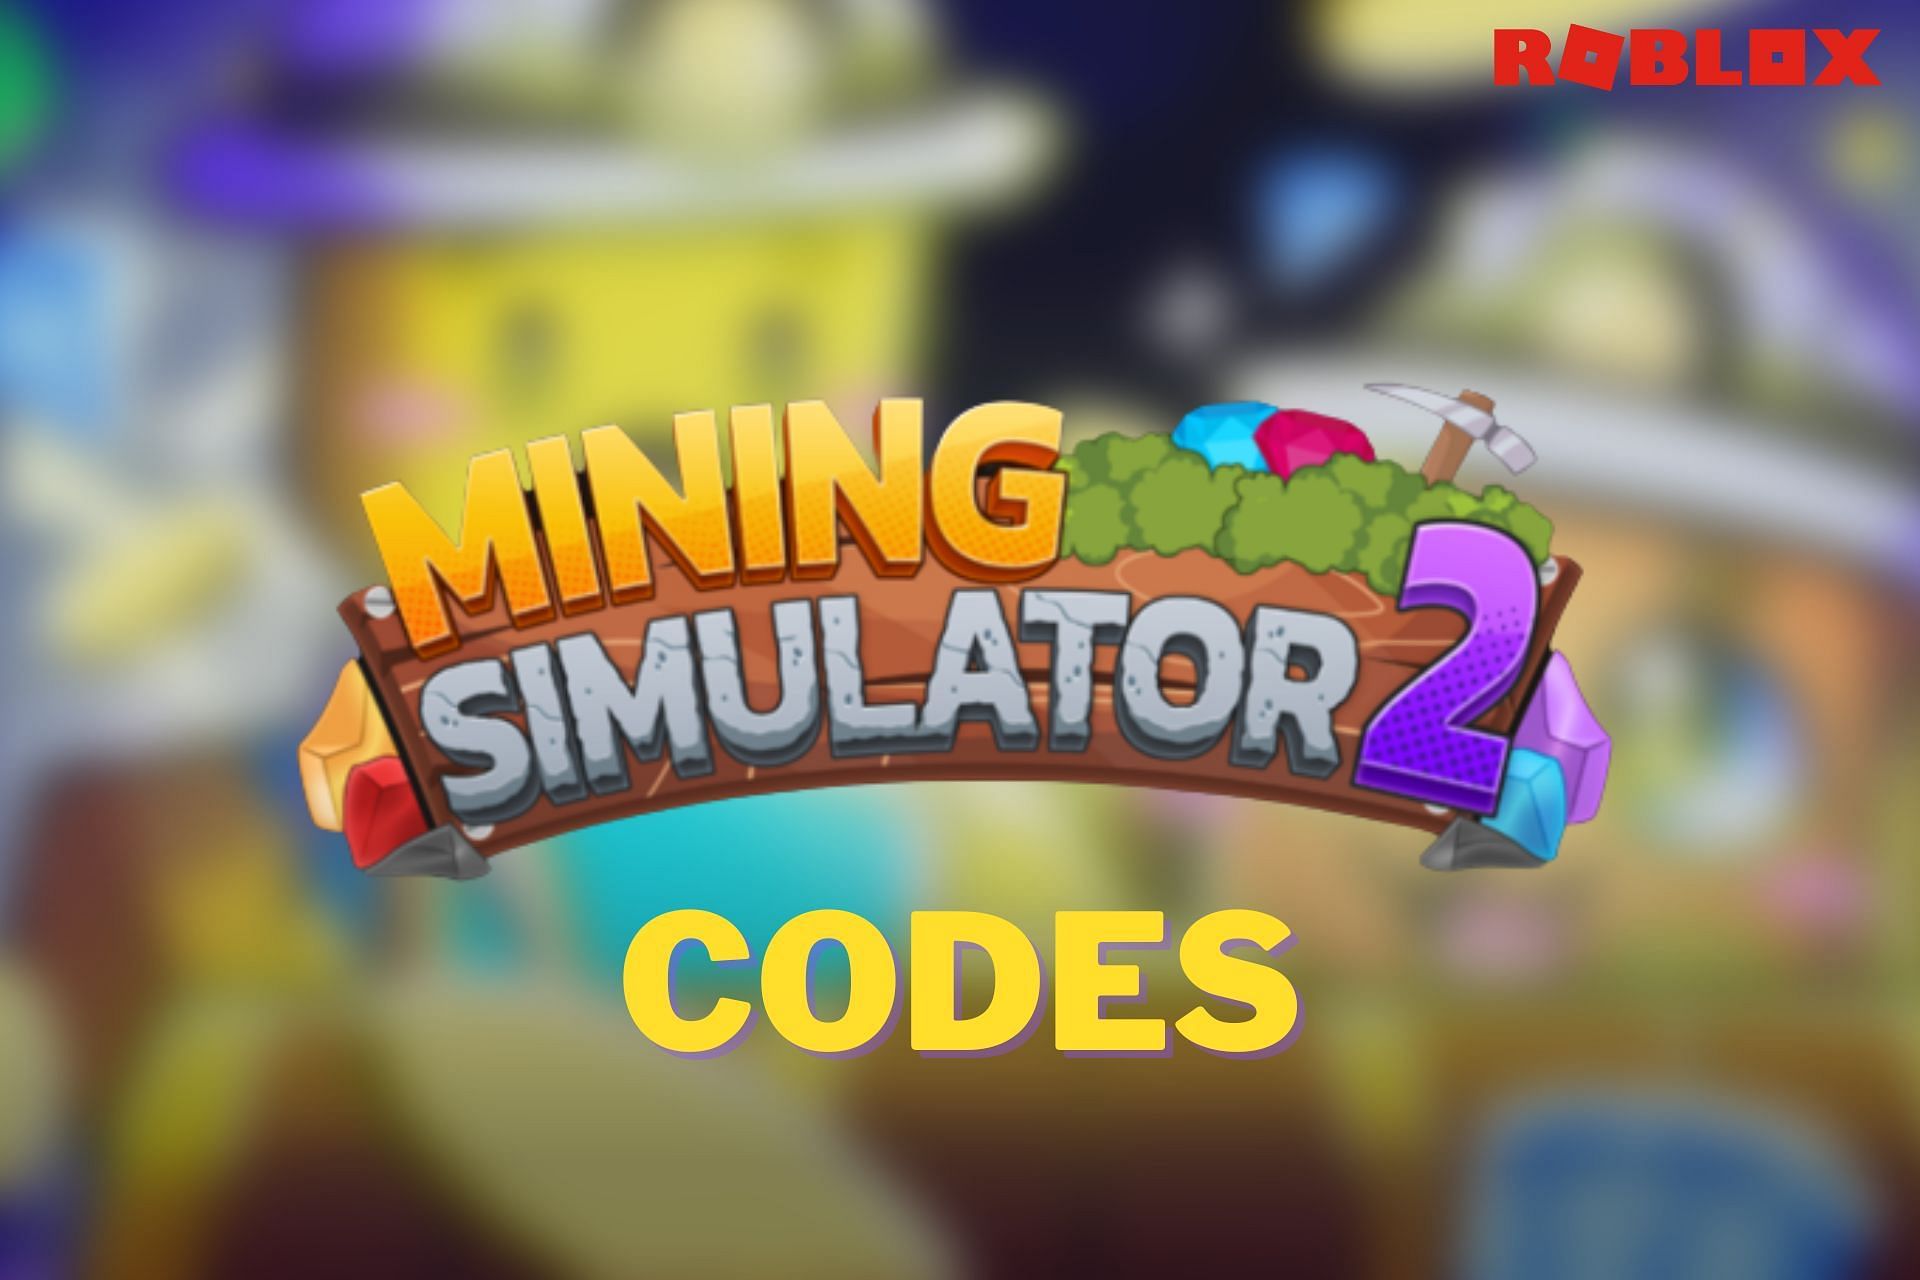 The Halloween special event is currently active in the world of Mining Simulator 2 (Image via Sportskeeda)